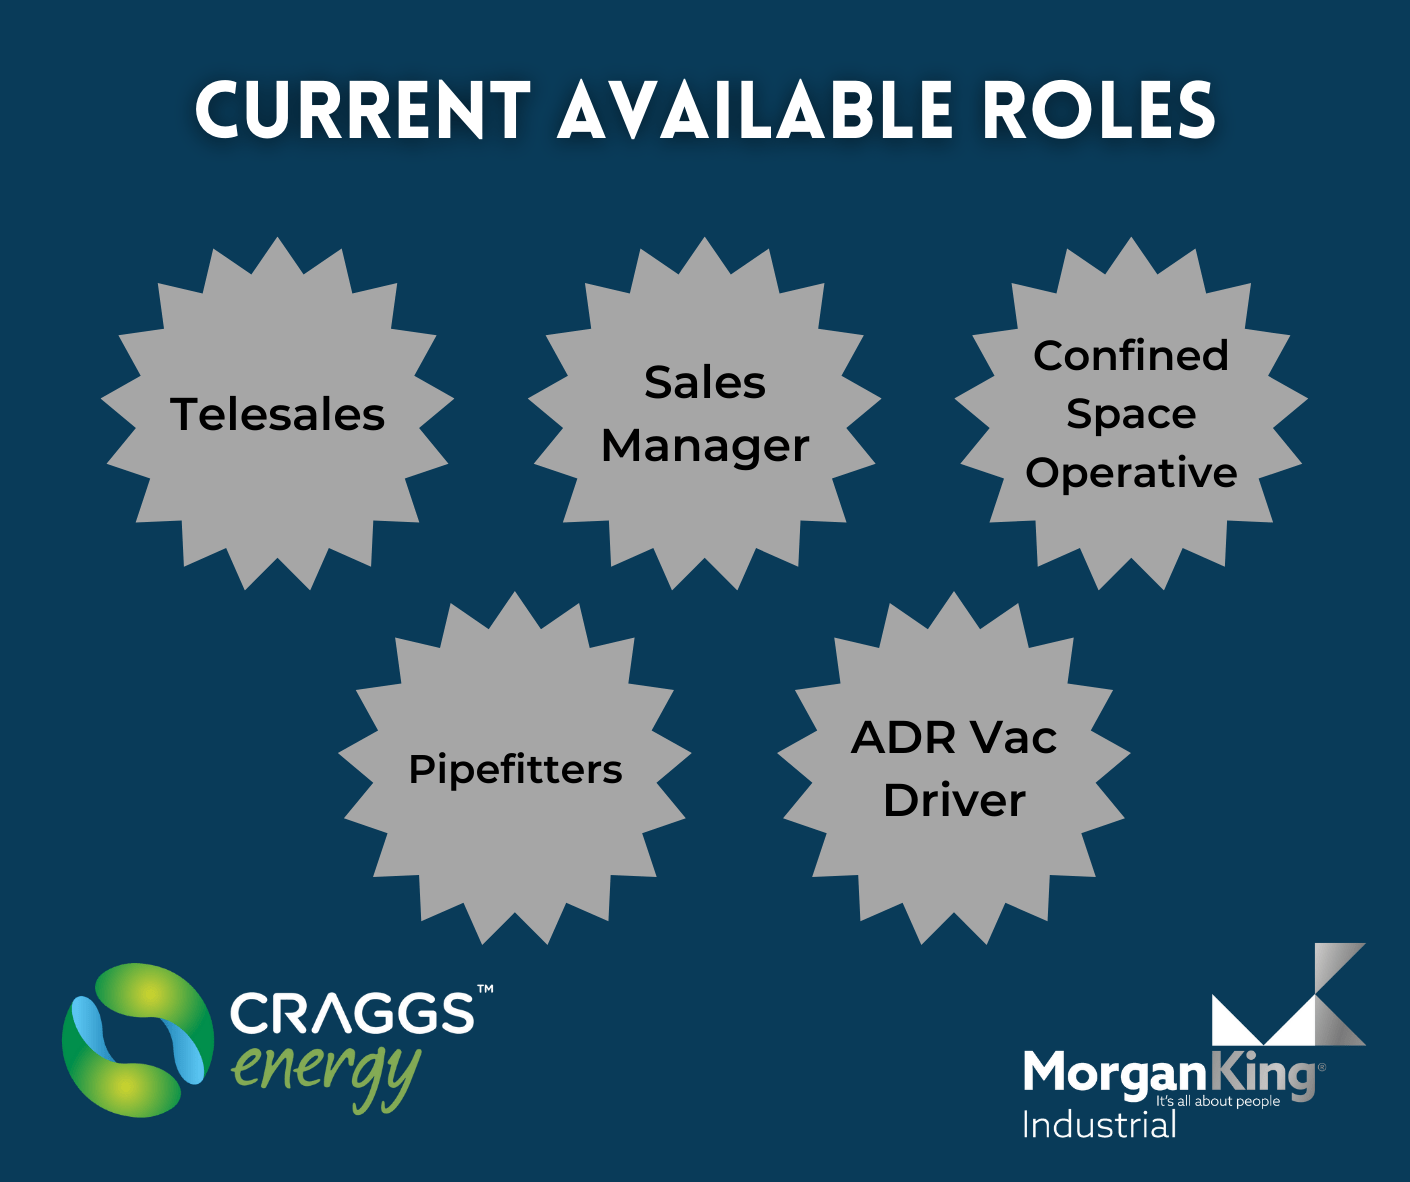 roles at craggs energy